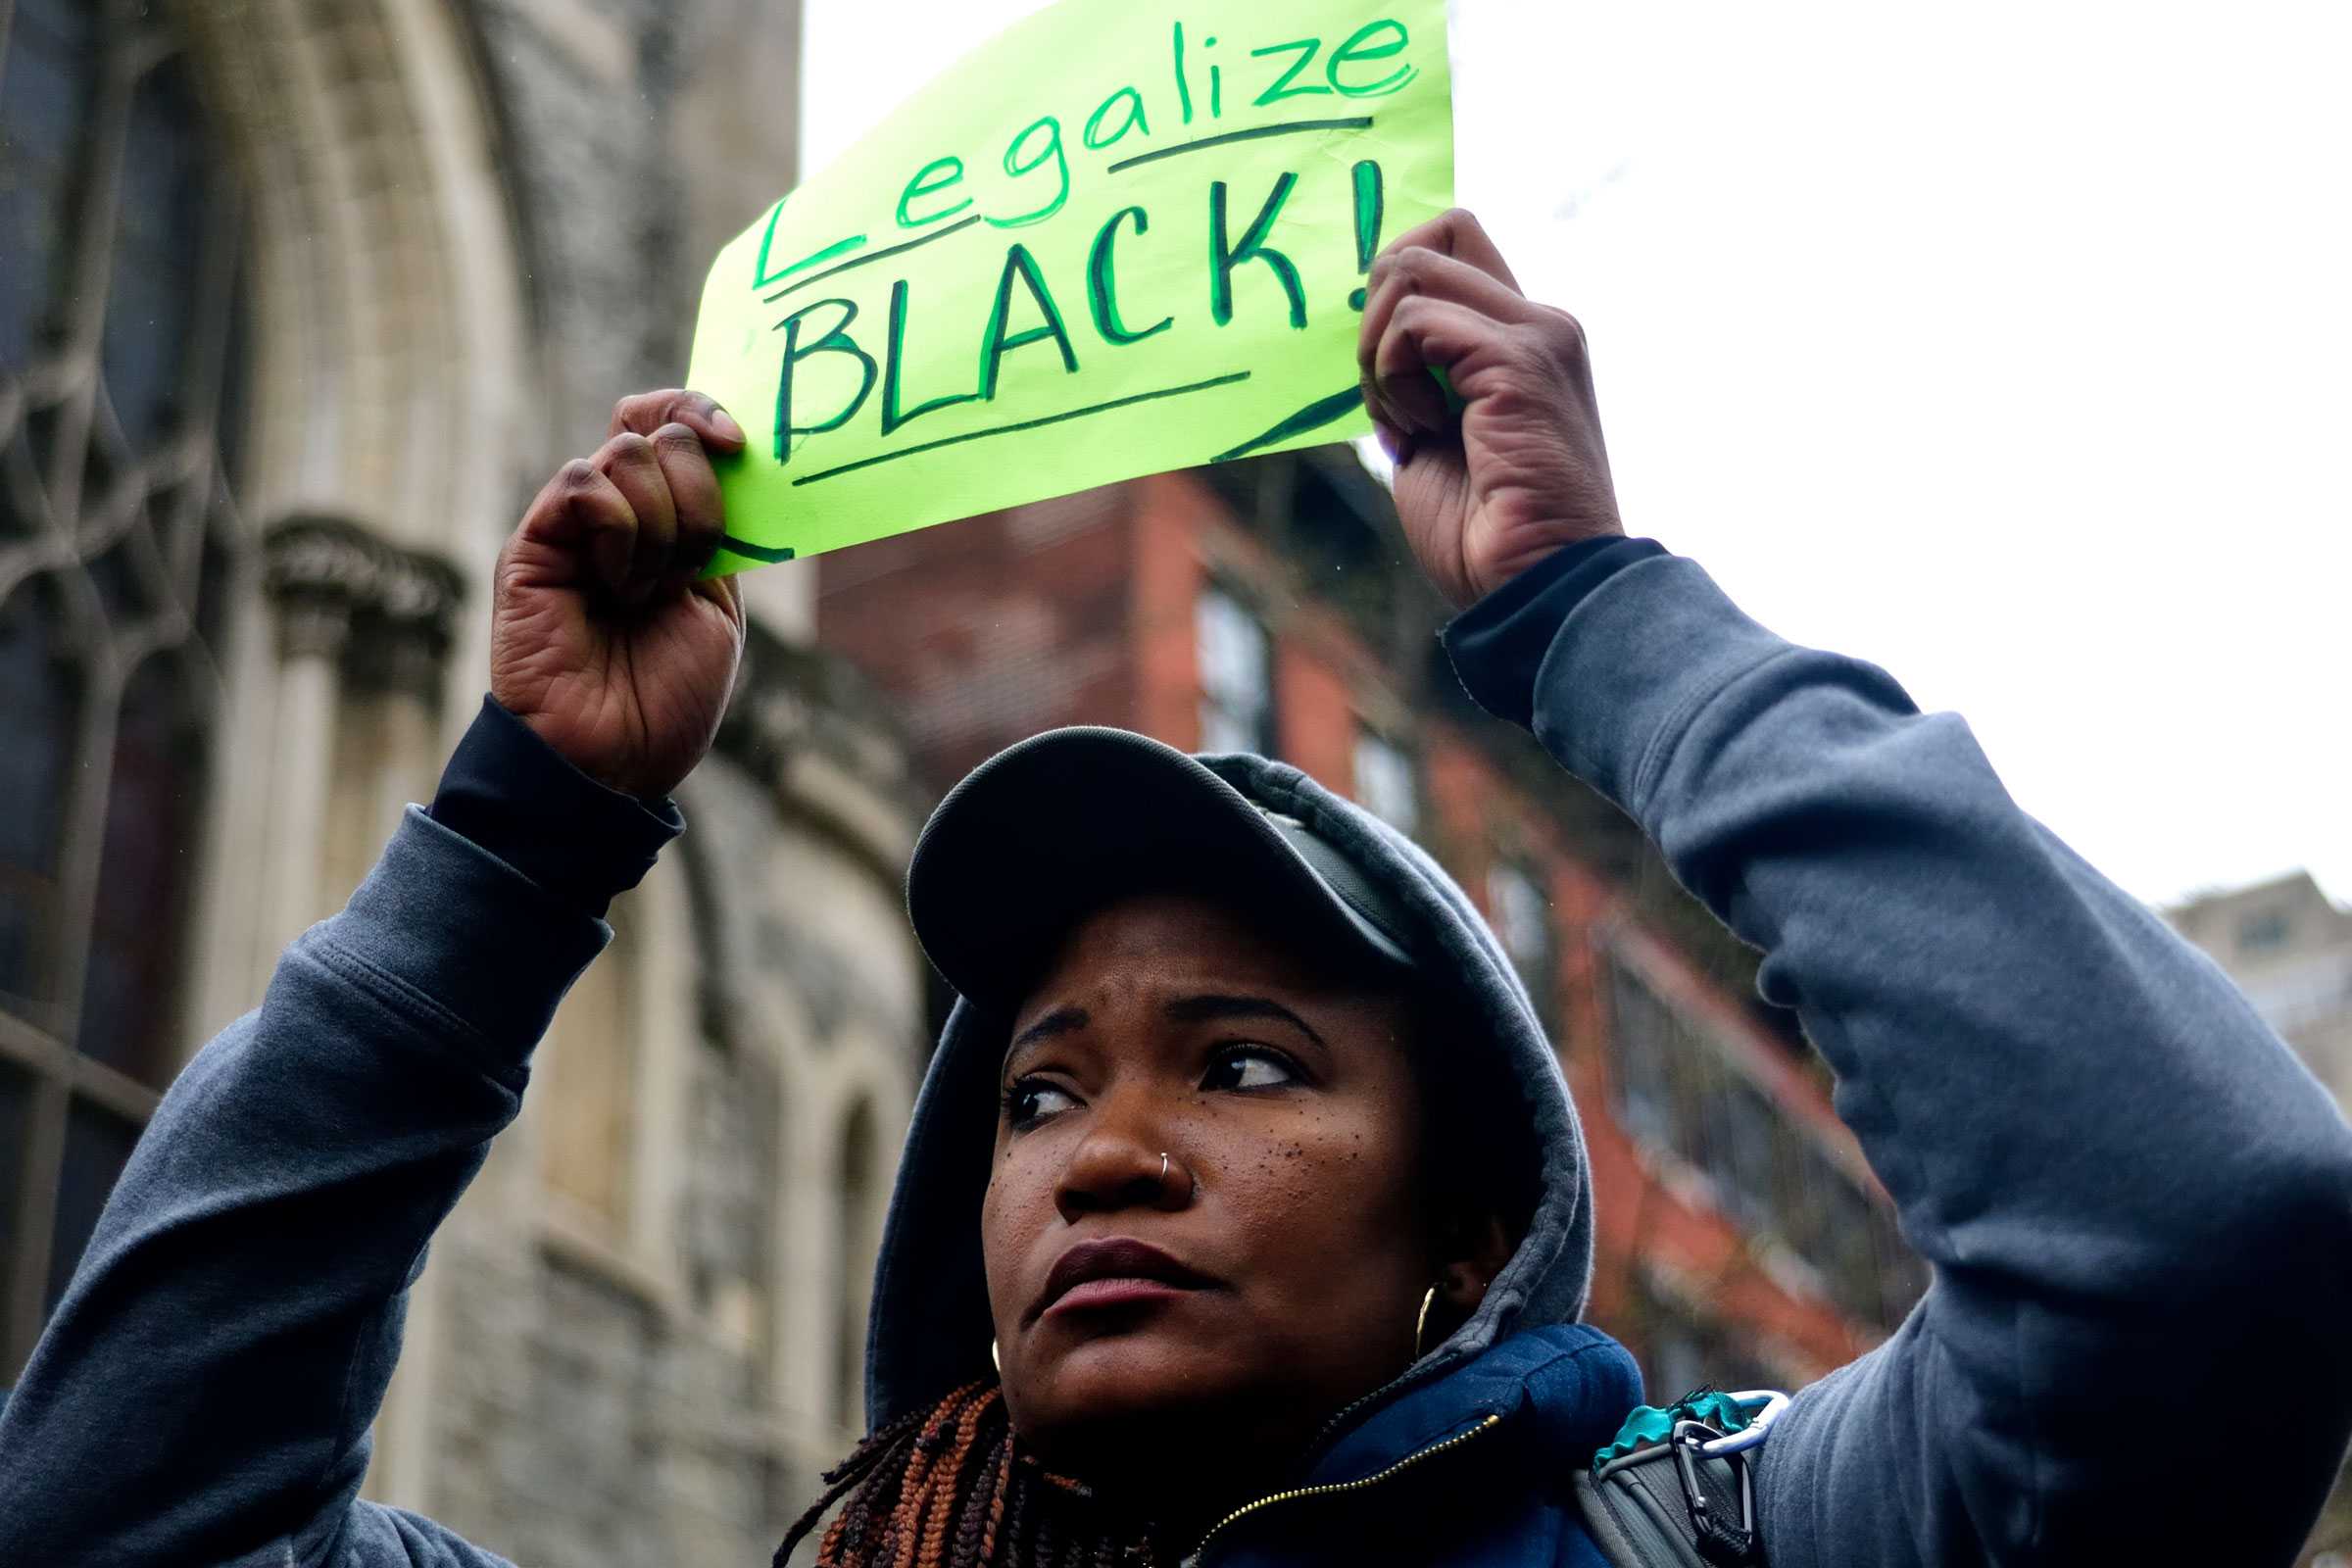 A woman looking defeated and sad is holding up a small neon green sign that says "Legalize Black".